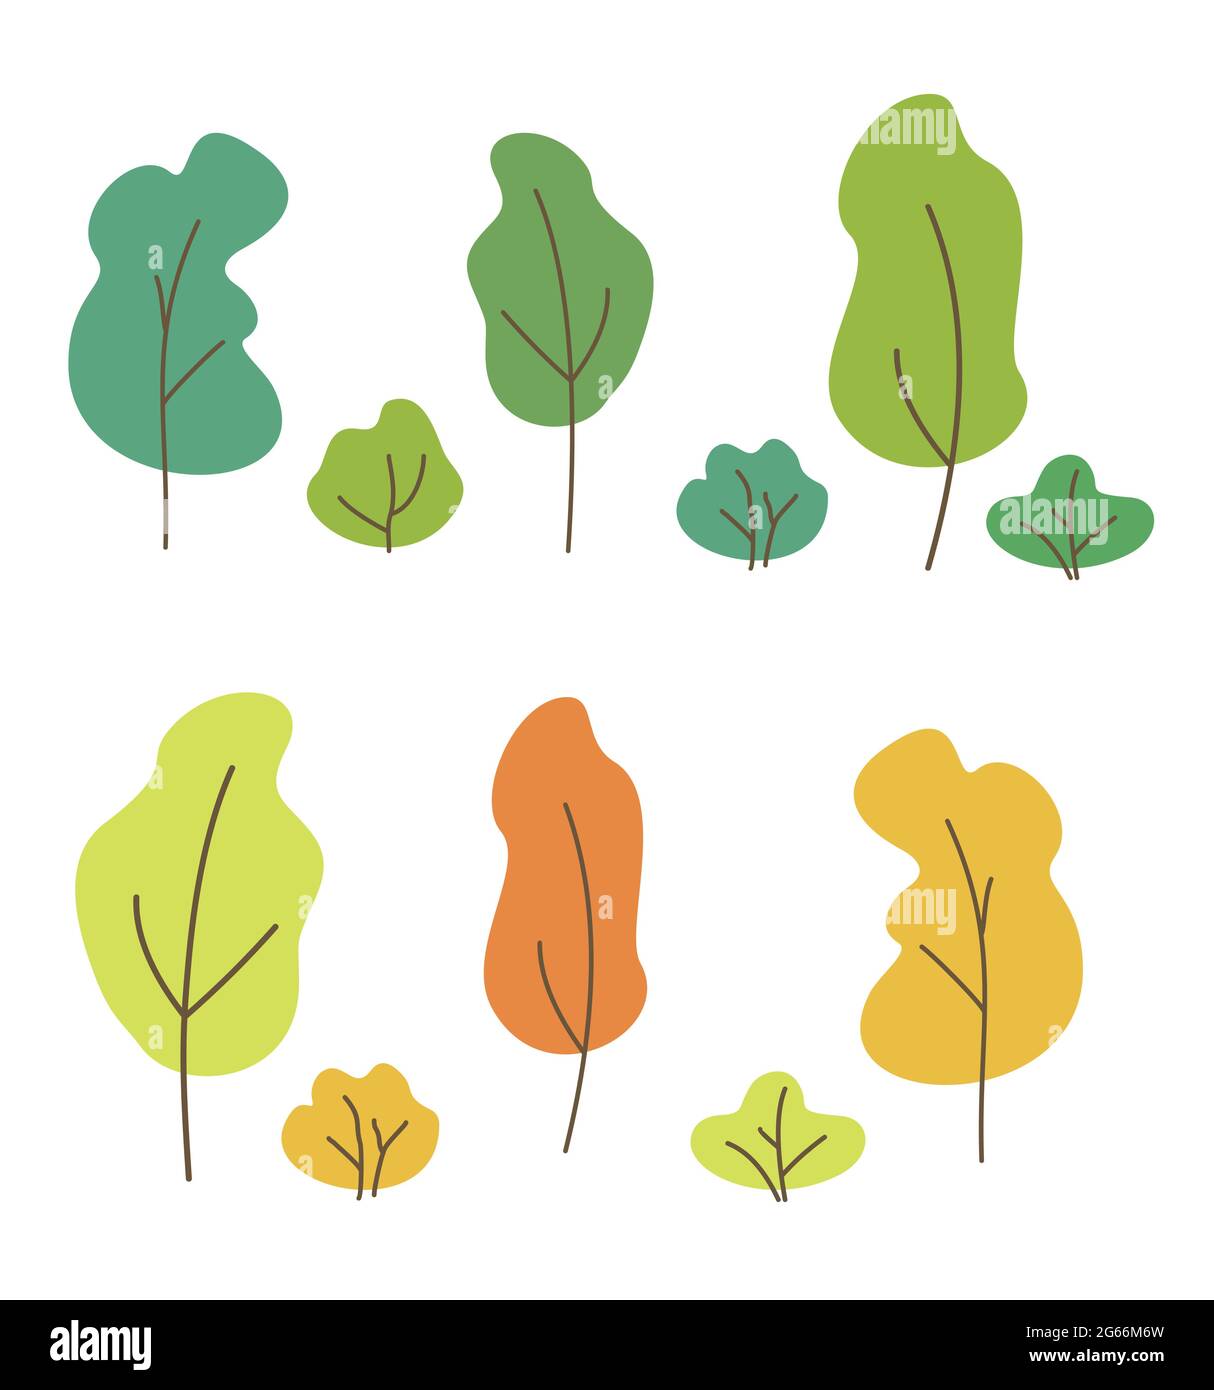 Vector illustration set of green, yellow, orange trees. Trees and bushes collection isolated on white background in flat style. Stock Vector